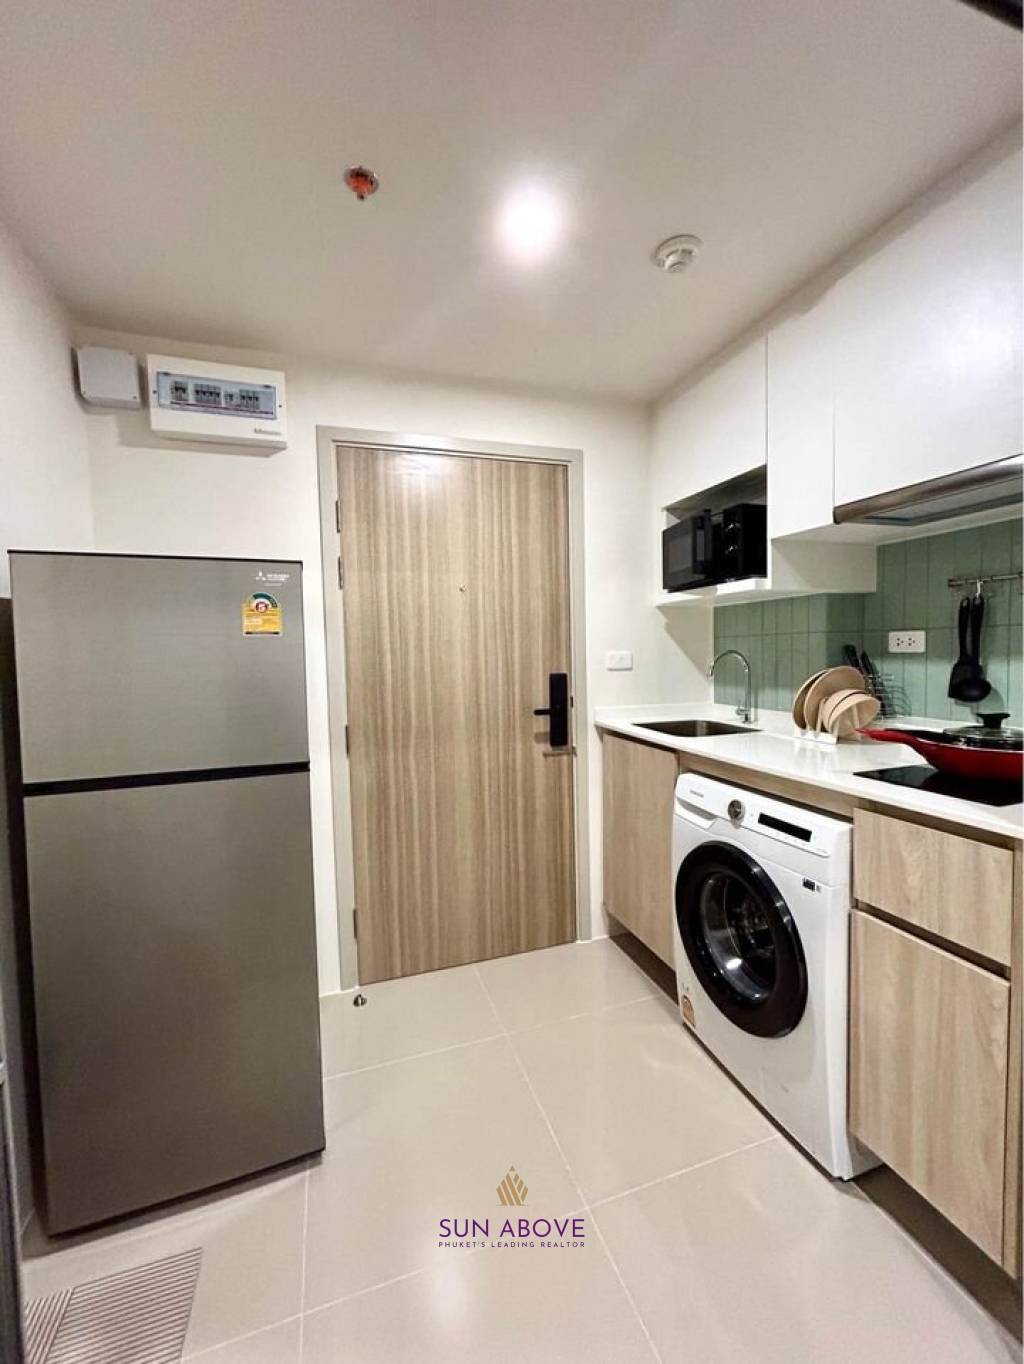 1 Bed 1 Bath 28.37 SQM. Phyll Phuket Condo For Rent